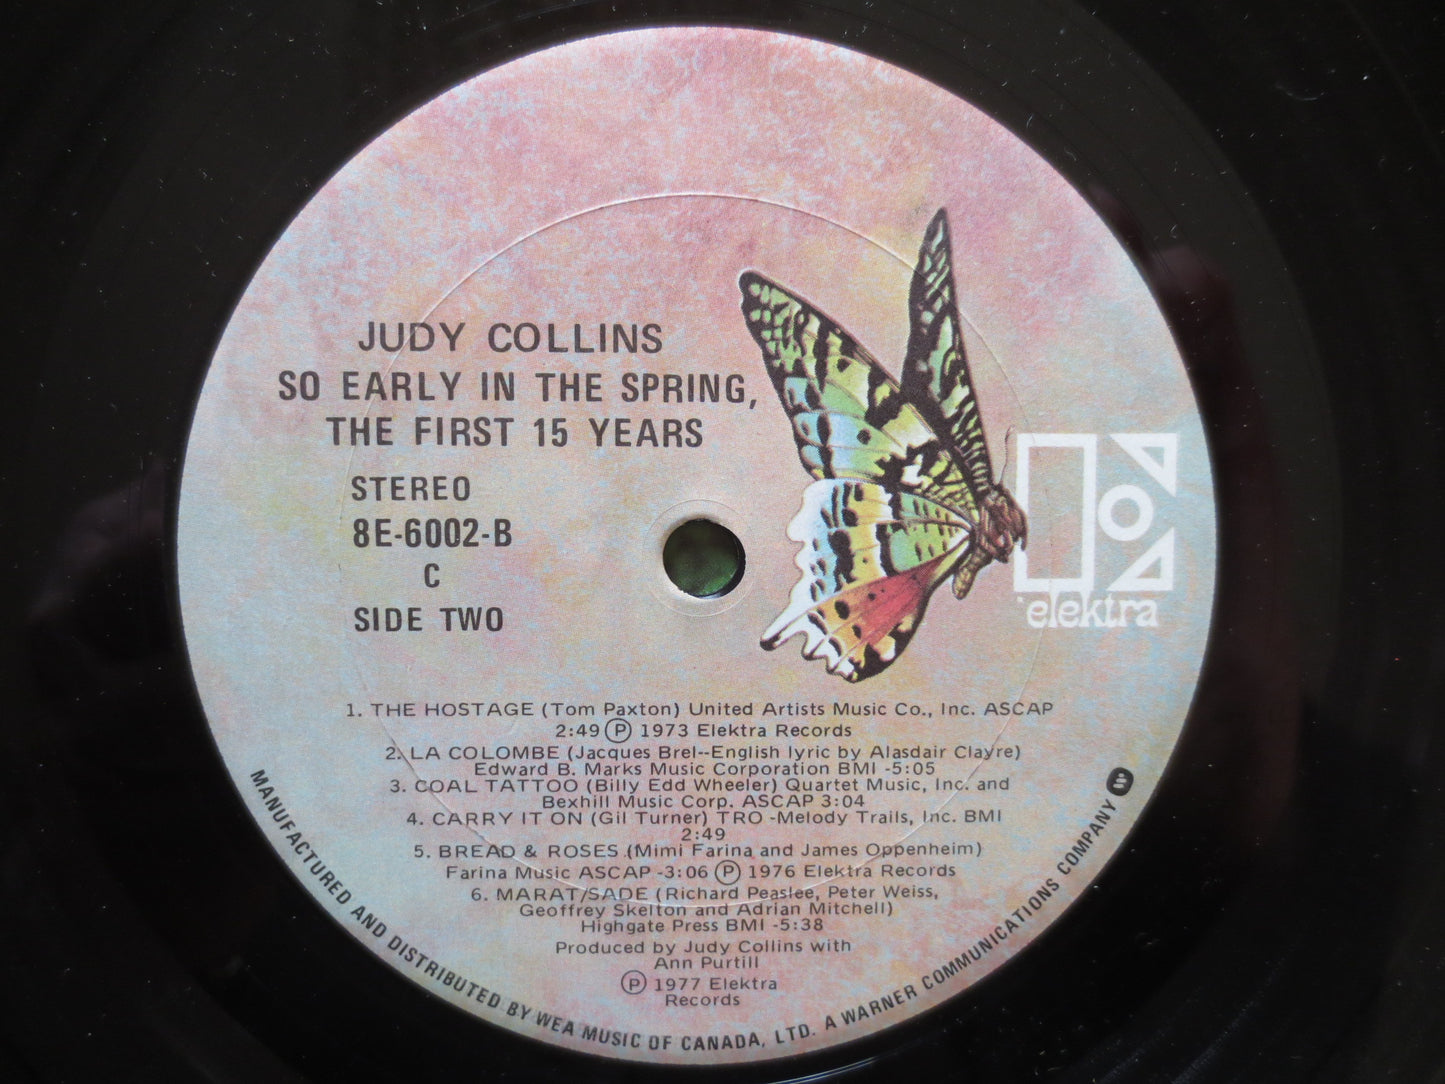 JUDY COLLINS, So Early in the SPRING, Judy Collins Album, Judy Collins Vinyl, Judy Collins Lp, Vinyl Lp, 1977 Records